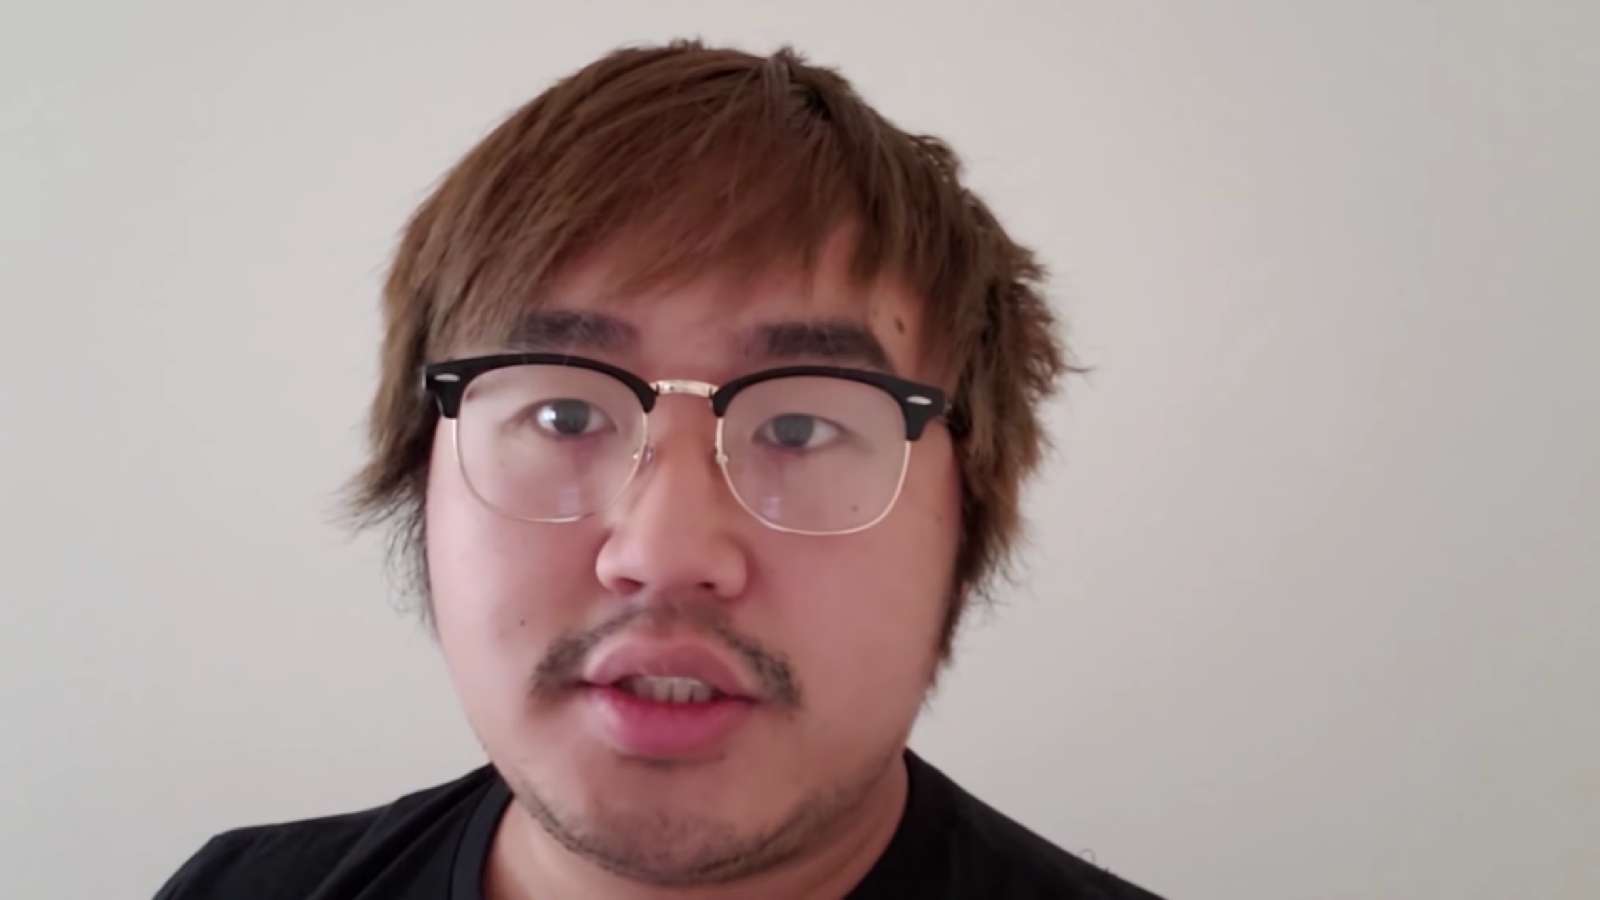 Asian Andy Films on YouTube